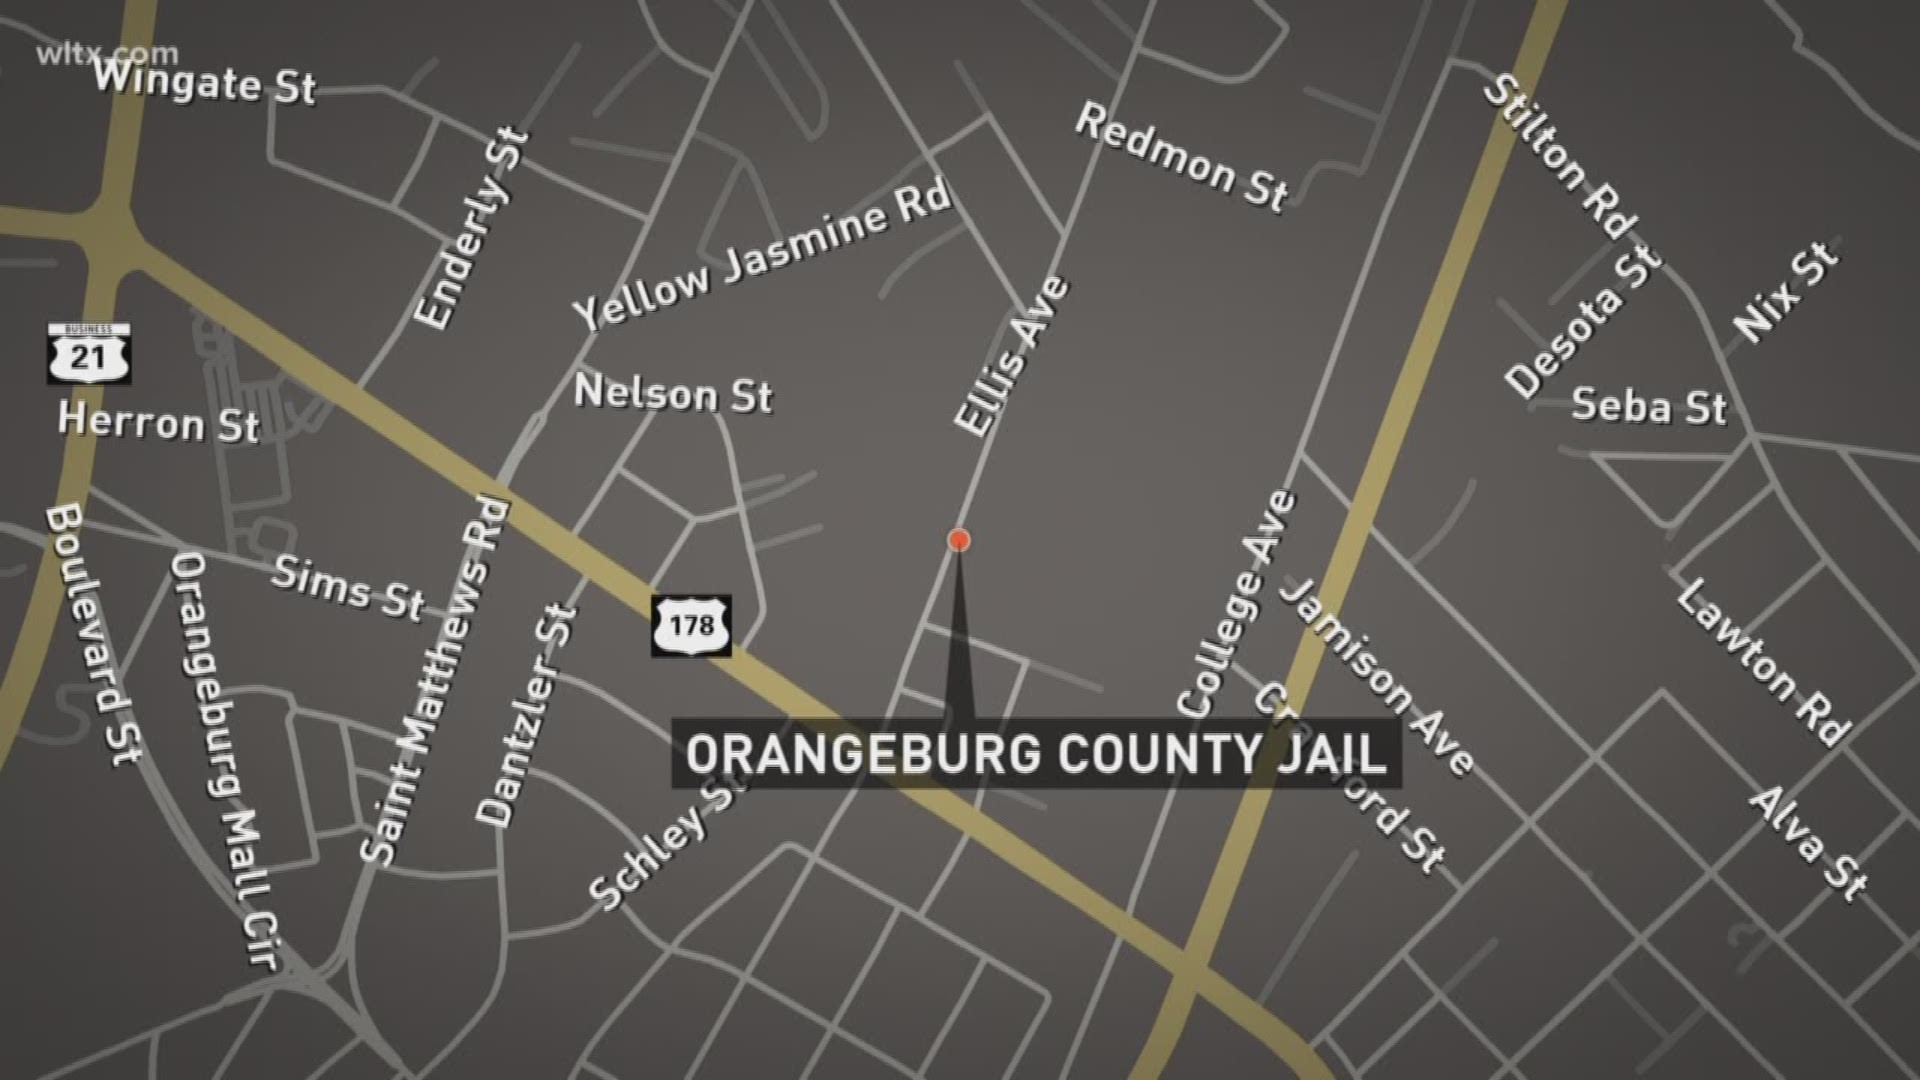 The Orangeburg County Sheriff's Office is investigating a potential jail break at the Orangeburg County Detention Center.